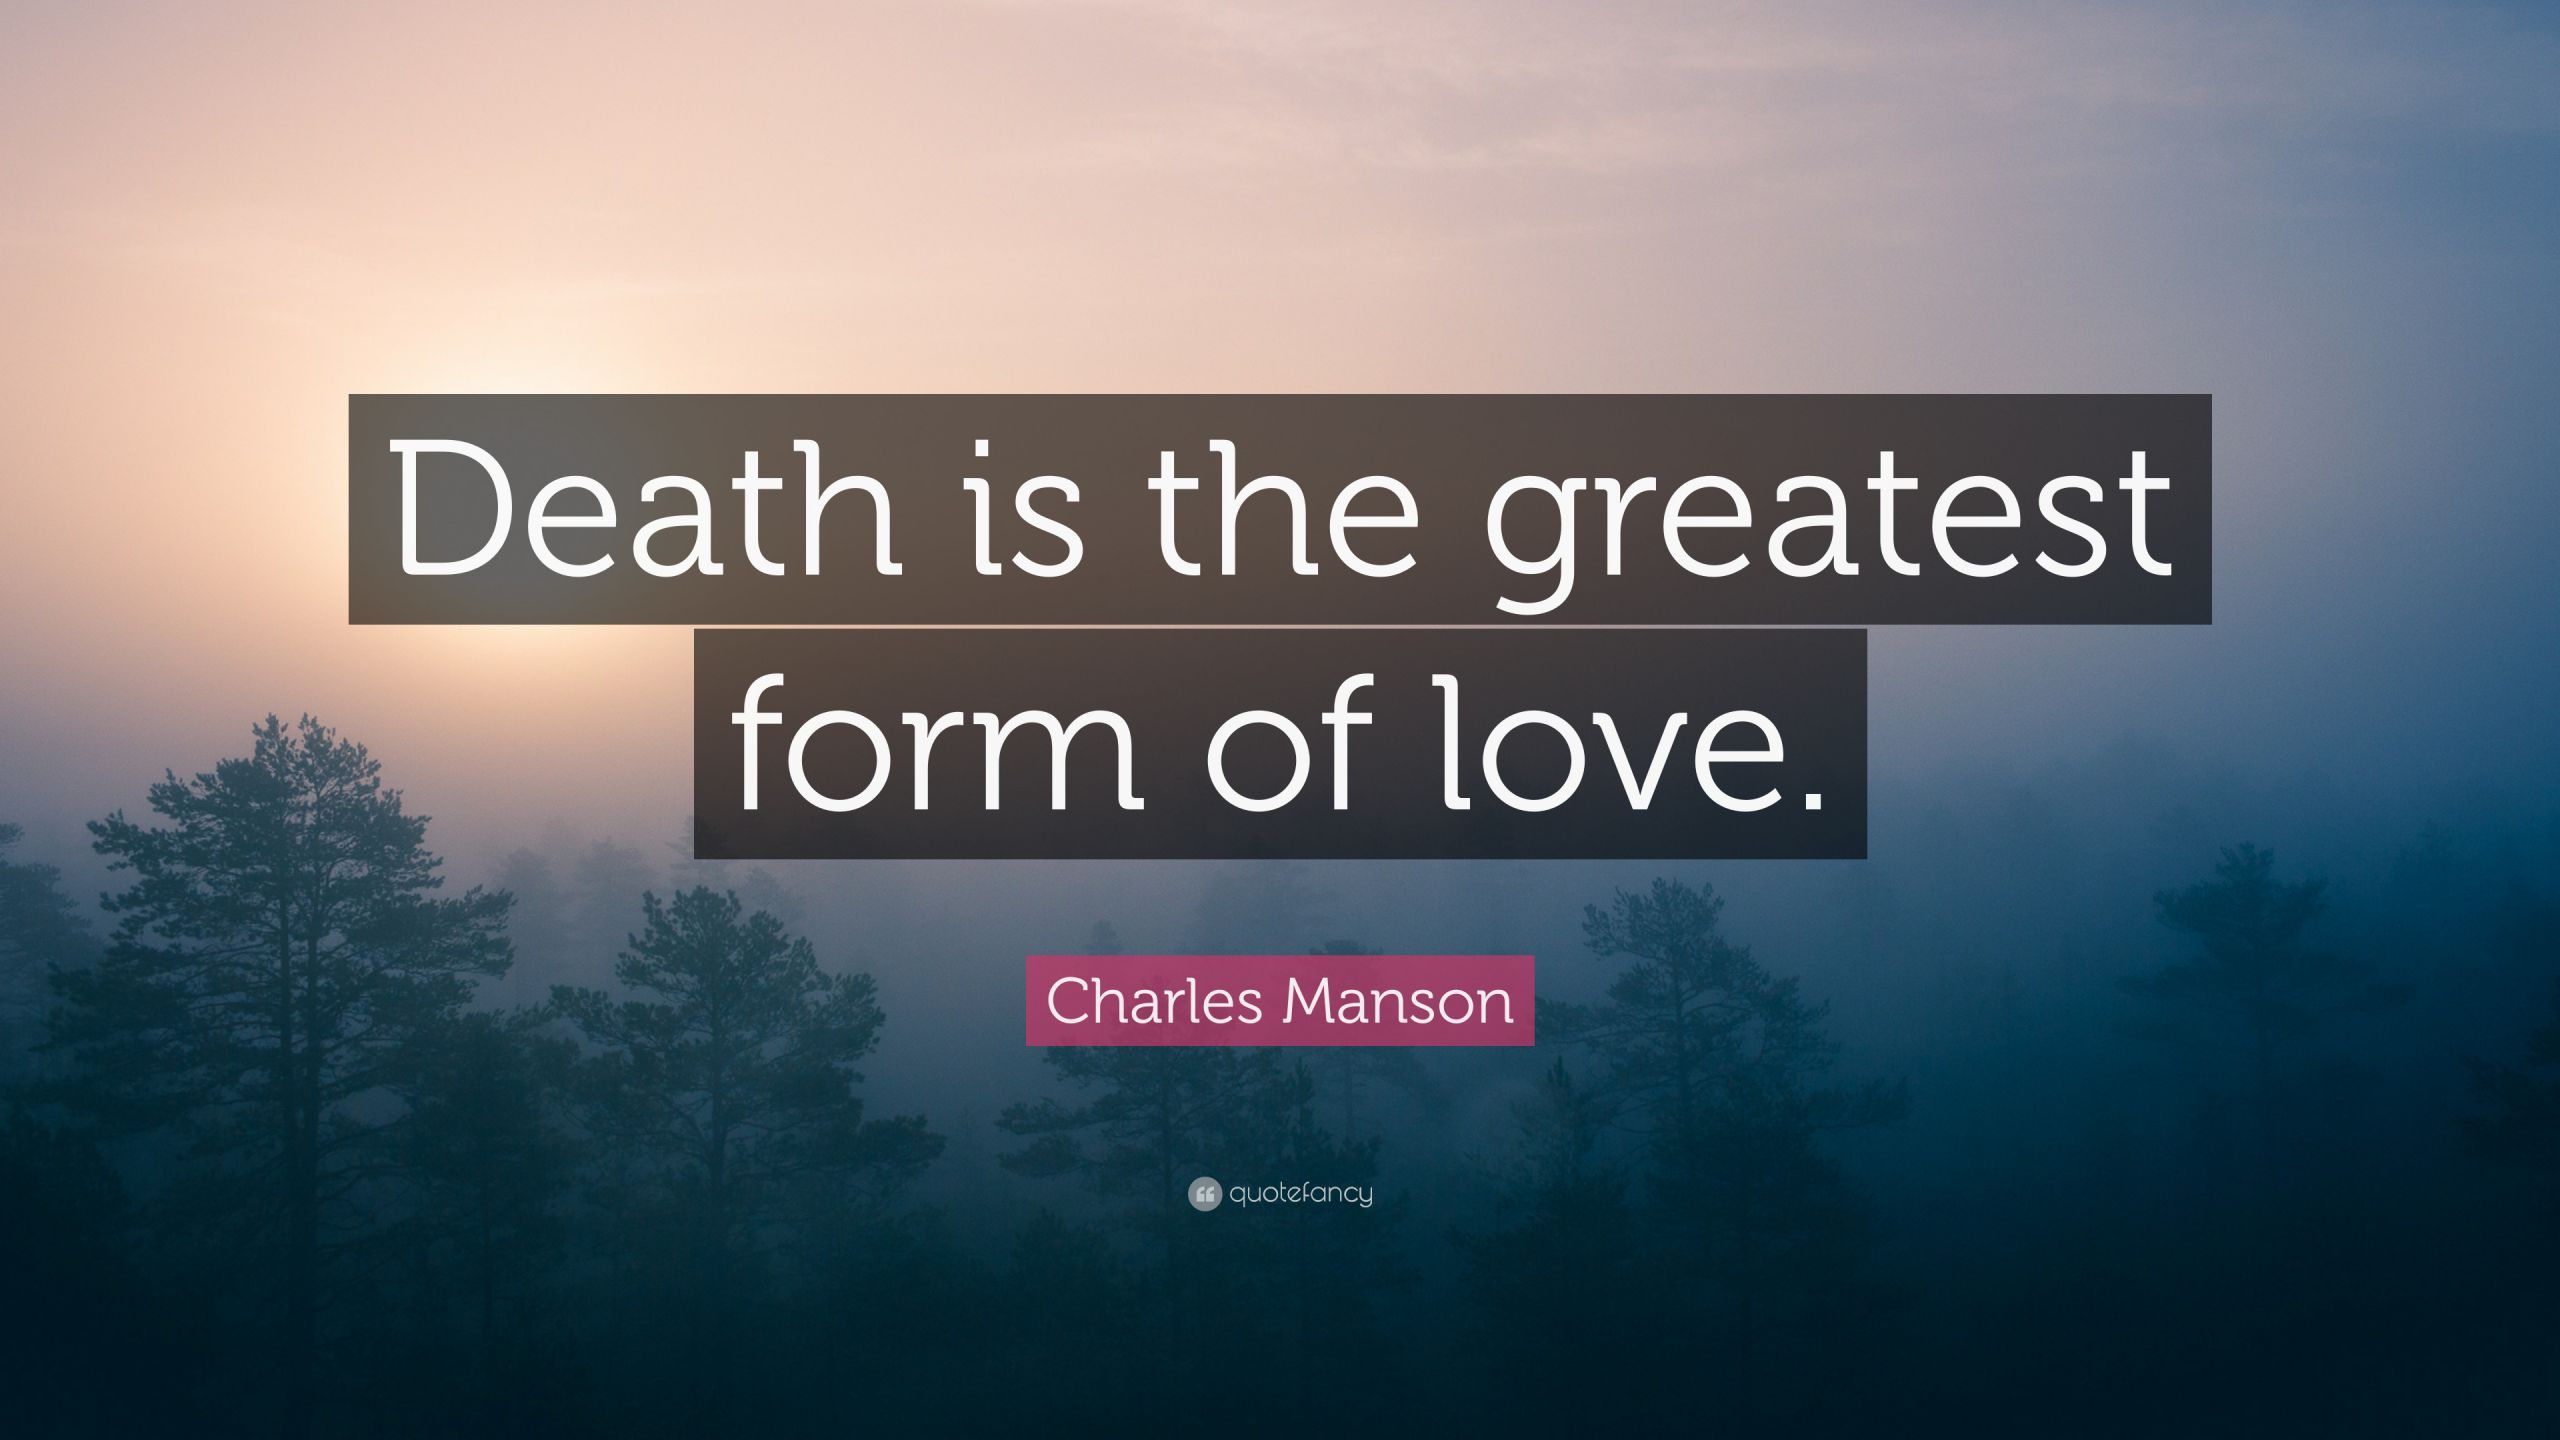 Quotes About Love And Death
 Charles Manson Quote “Death is the greatest form of love ”